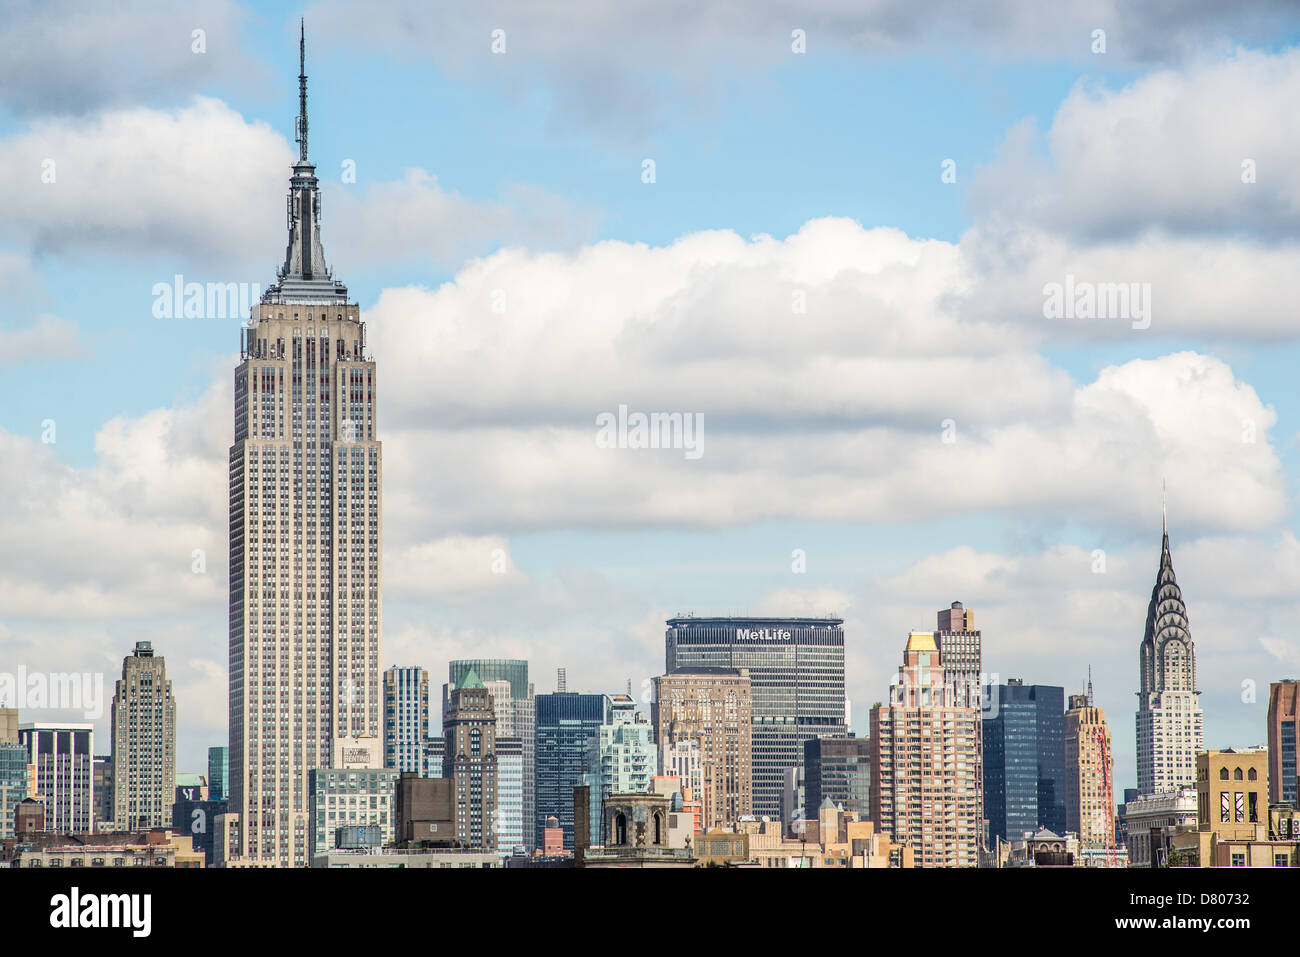 Skyline of New York City prominently featuring the Empire State Building. Stock Photo